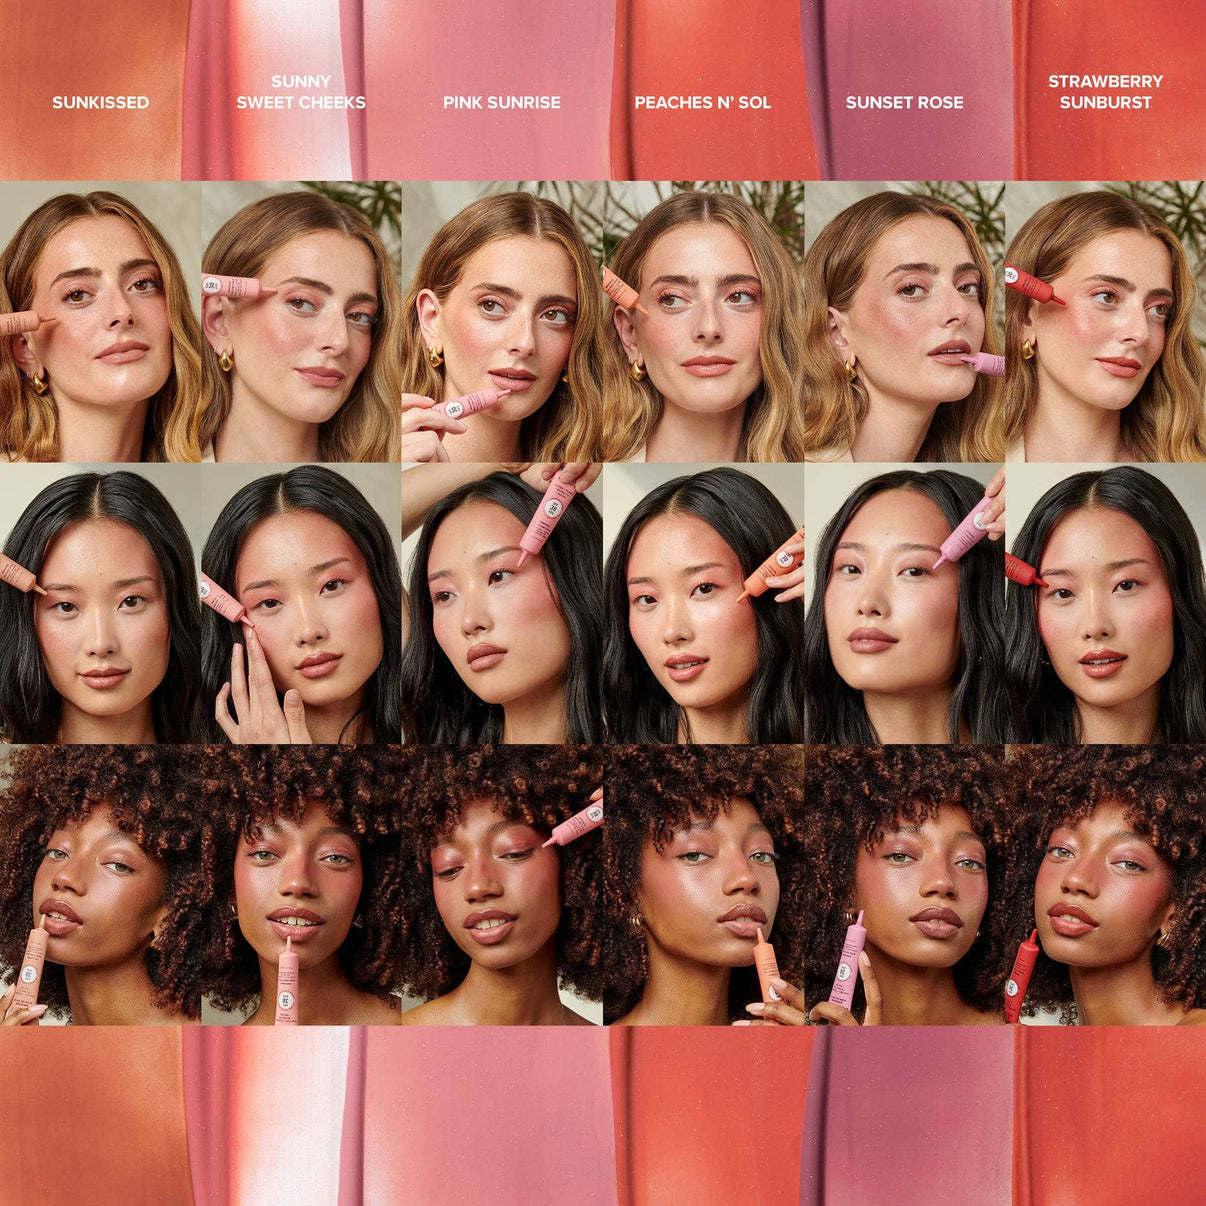 Models wearing Nudescreen blush tint in shade PEACHES N' SOL